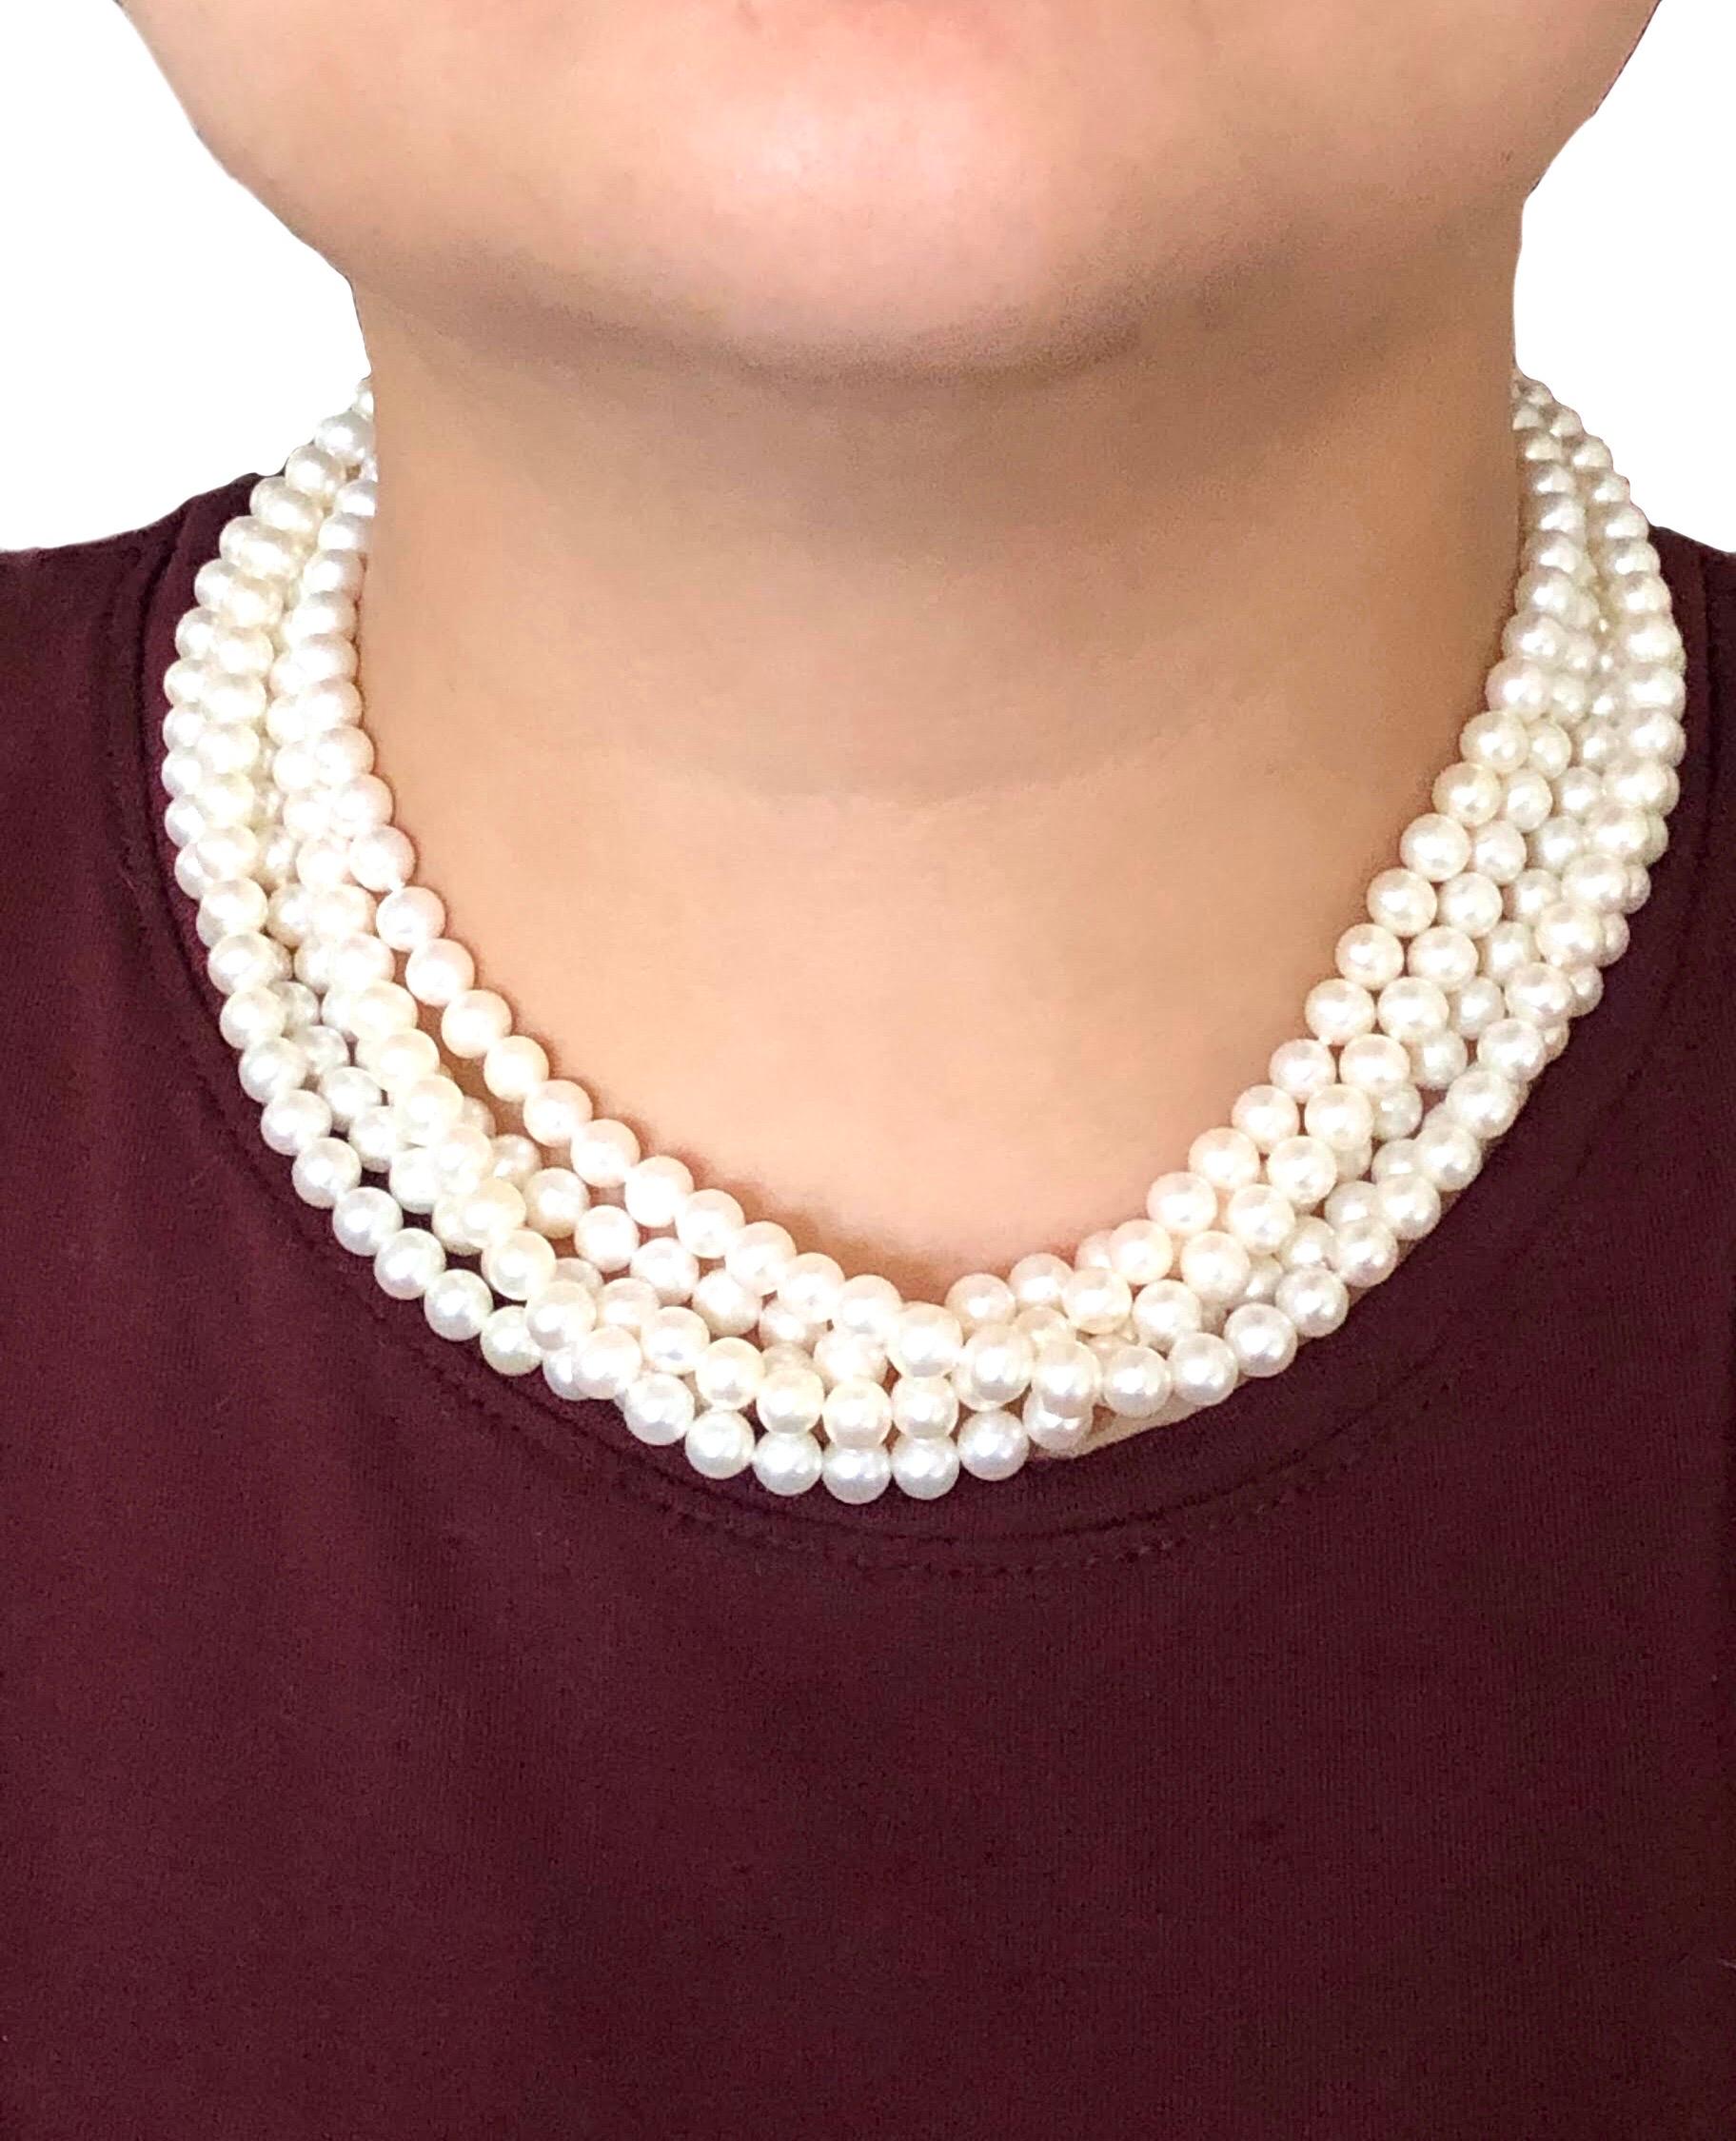 Circa 2018 Paloma Picasso for Tiffany & Company Torsade Necklace, comprising 4 strands of Round 6 M.M. Cultured Pearls that are Fine White luster in color with a light hint of Pink and grade as AA with no surface blemishes. Having Sterling Silver